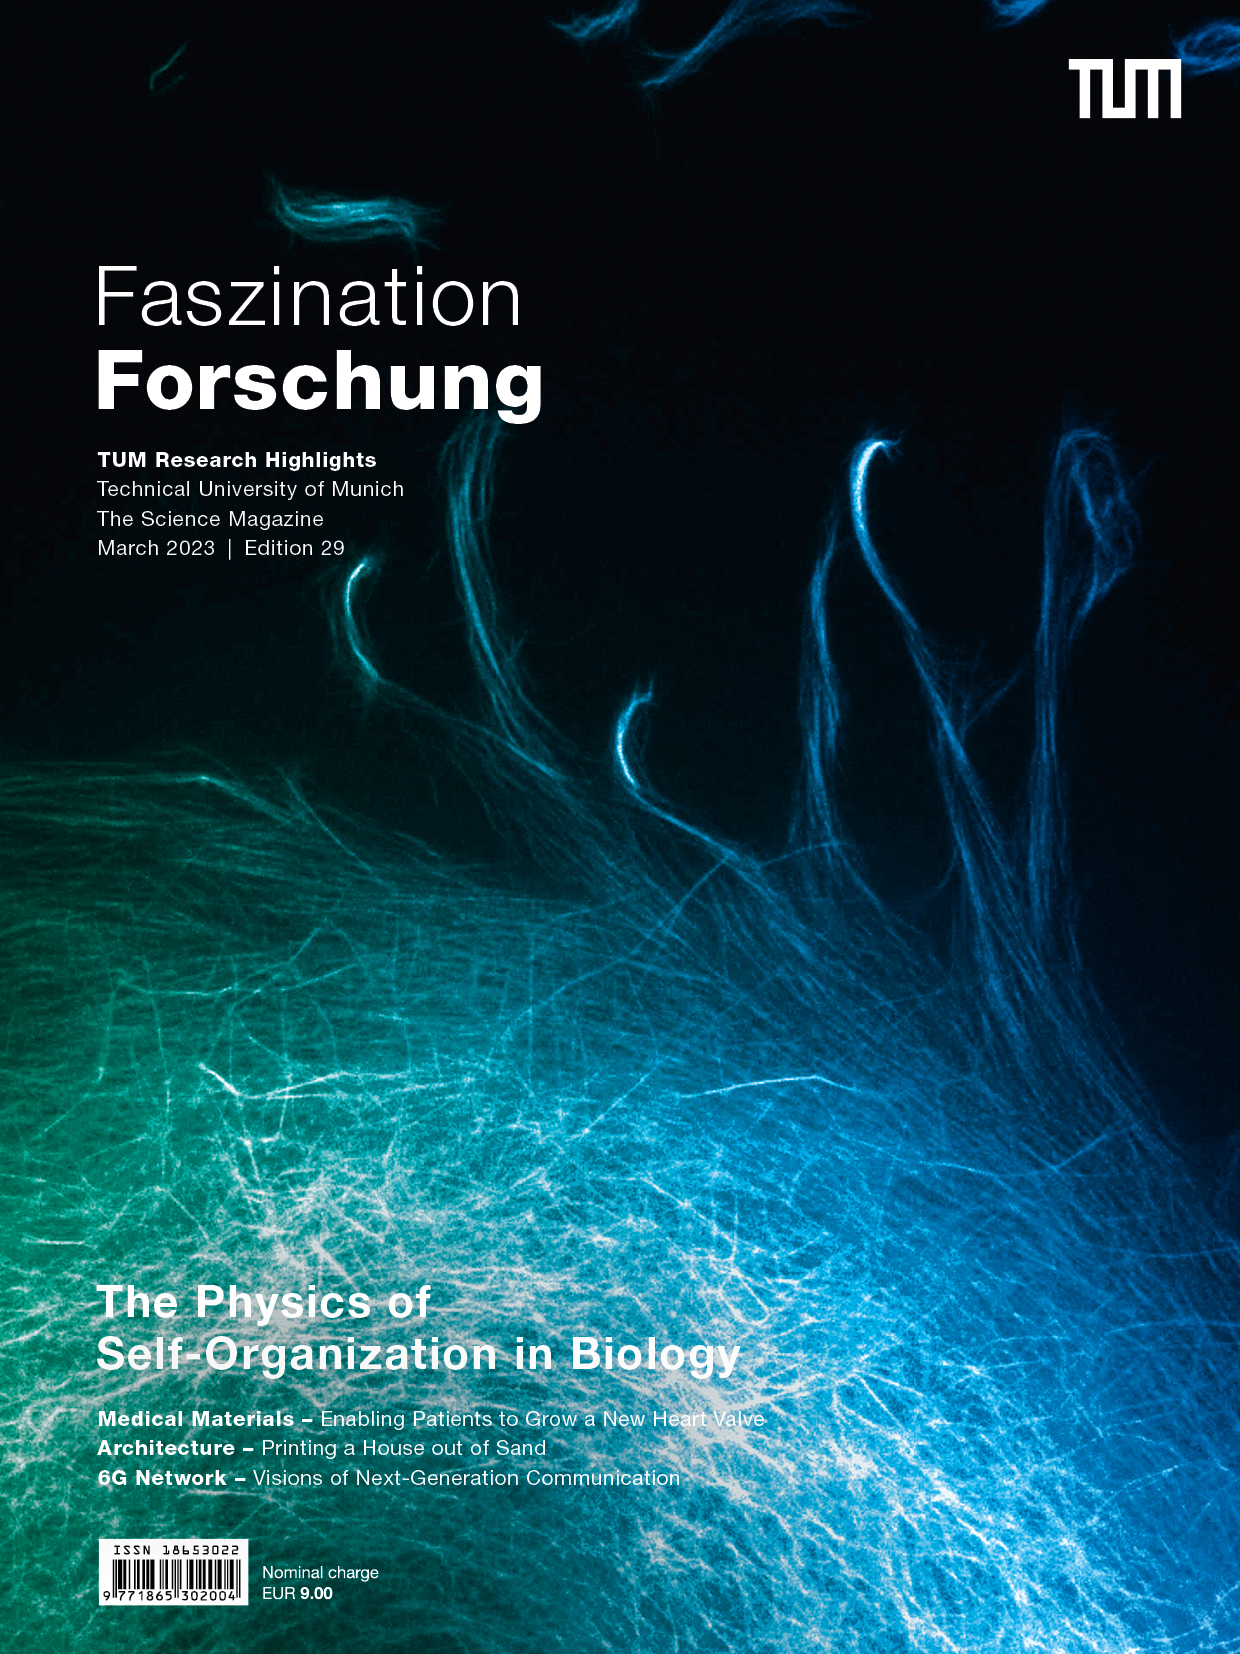 Cover page of “Faszination Forschung” magazine, edition 29